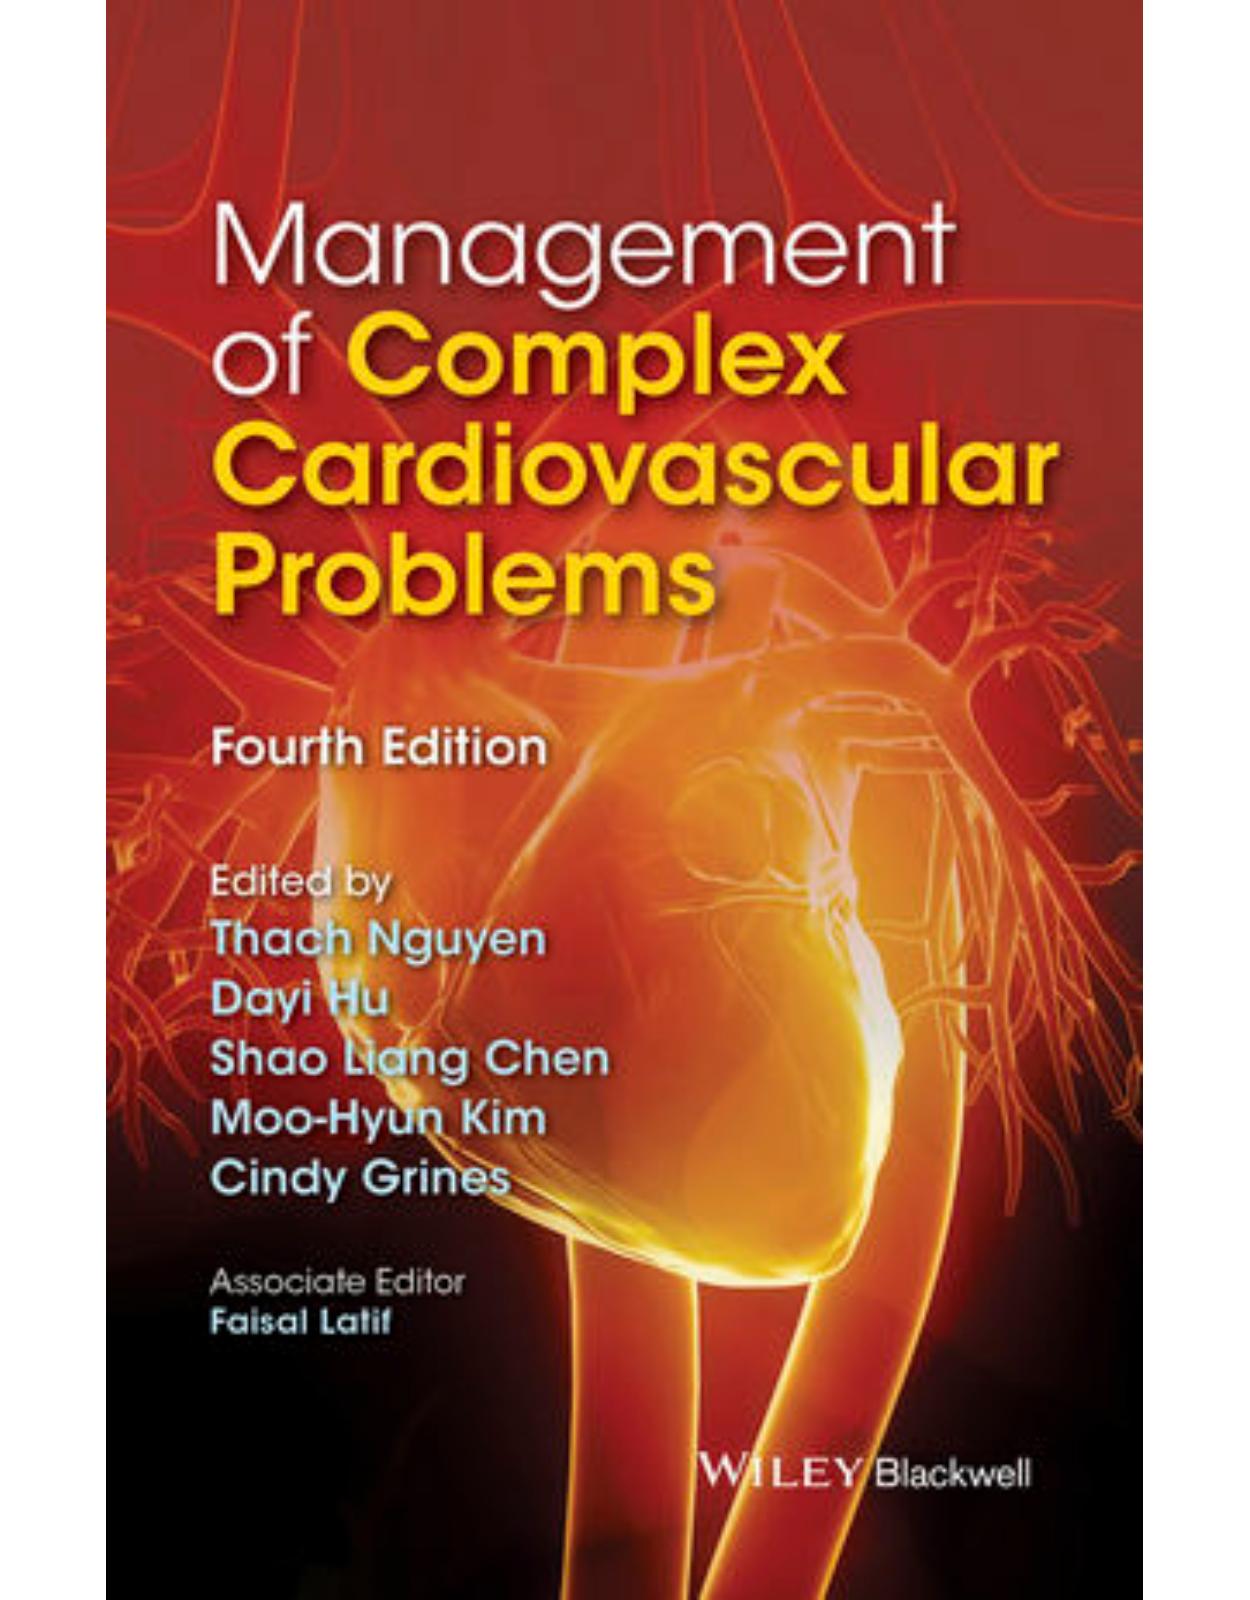  Management of Complex Cardiovascular Problems, 4th Edition